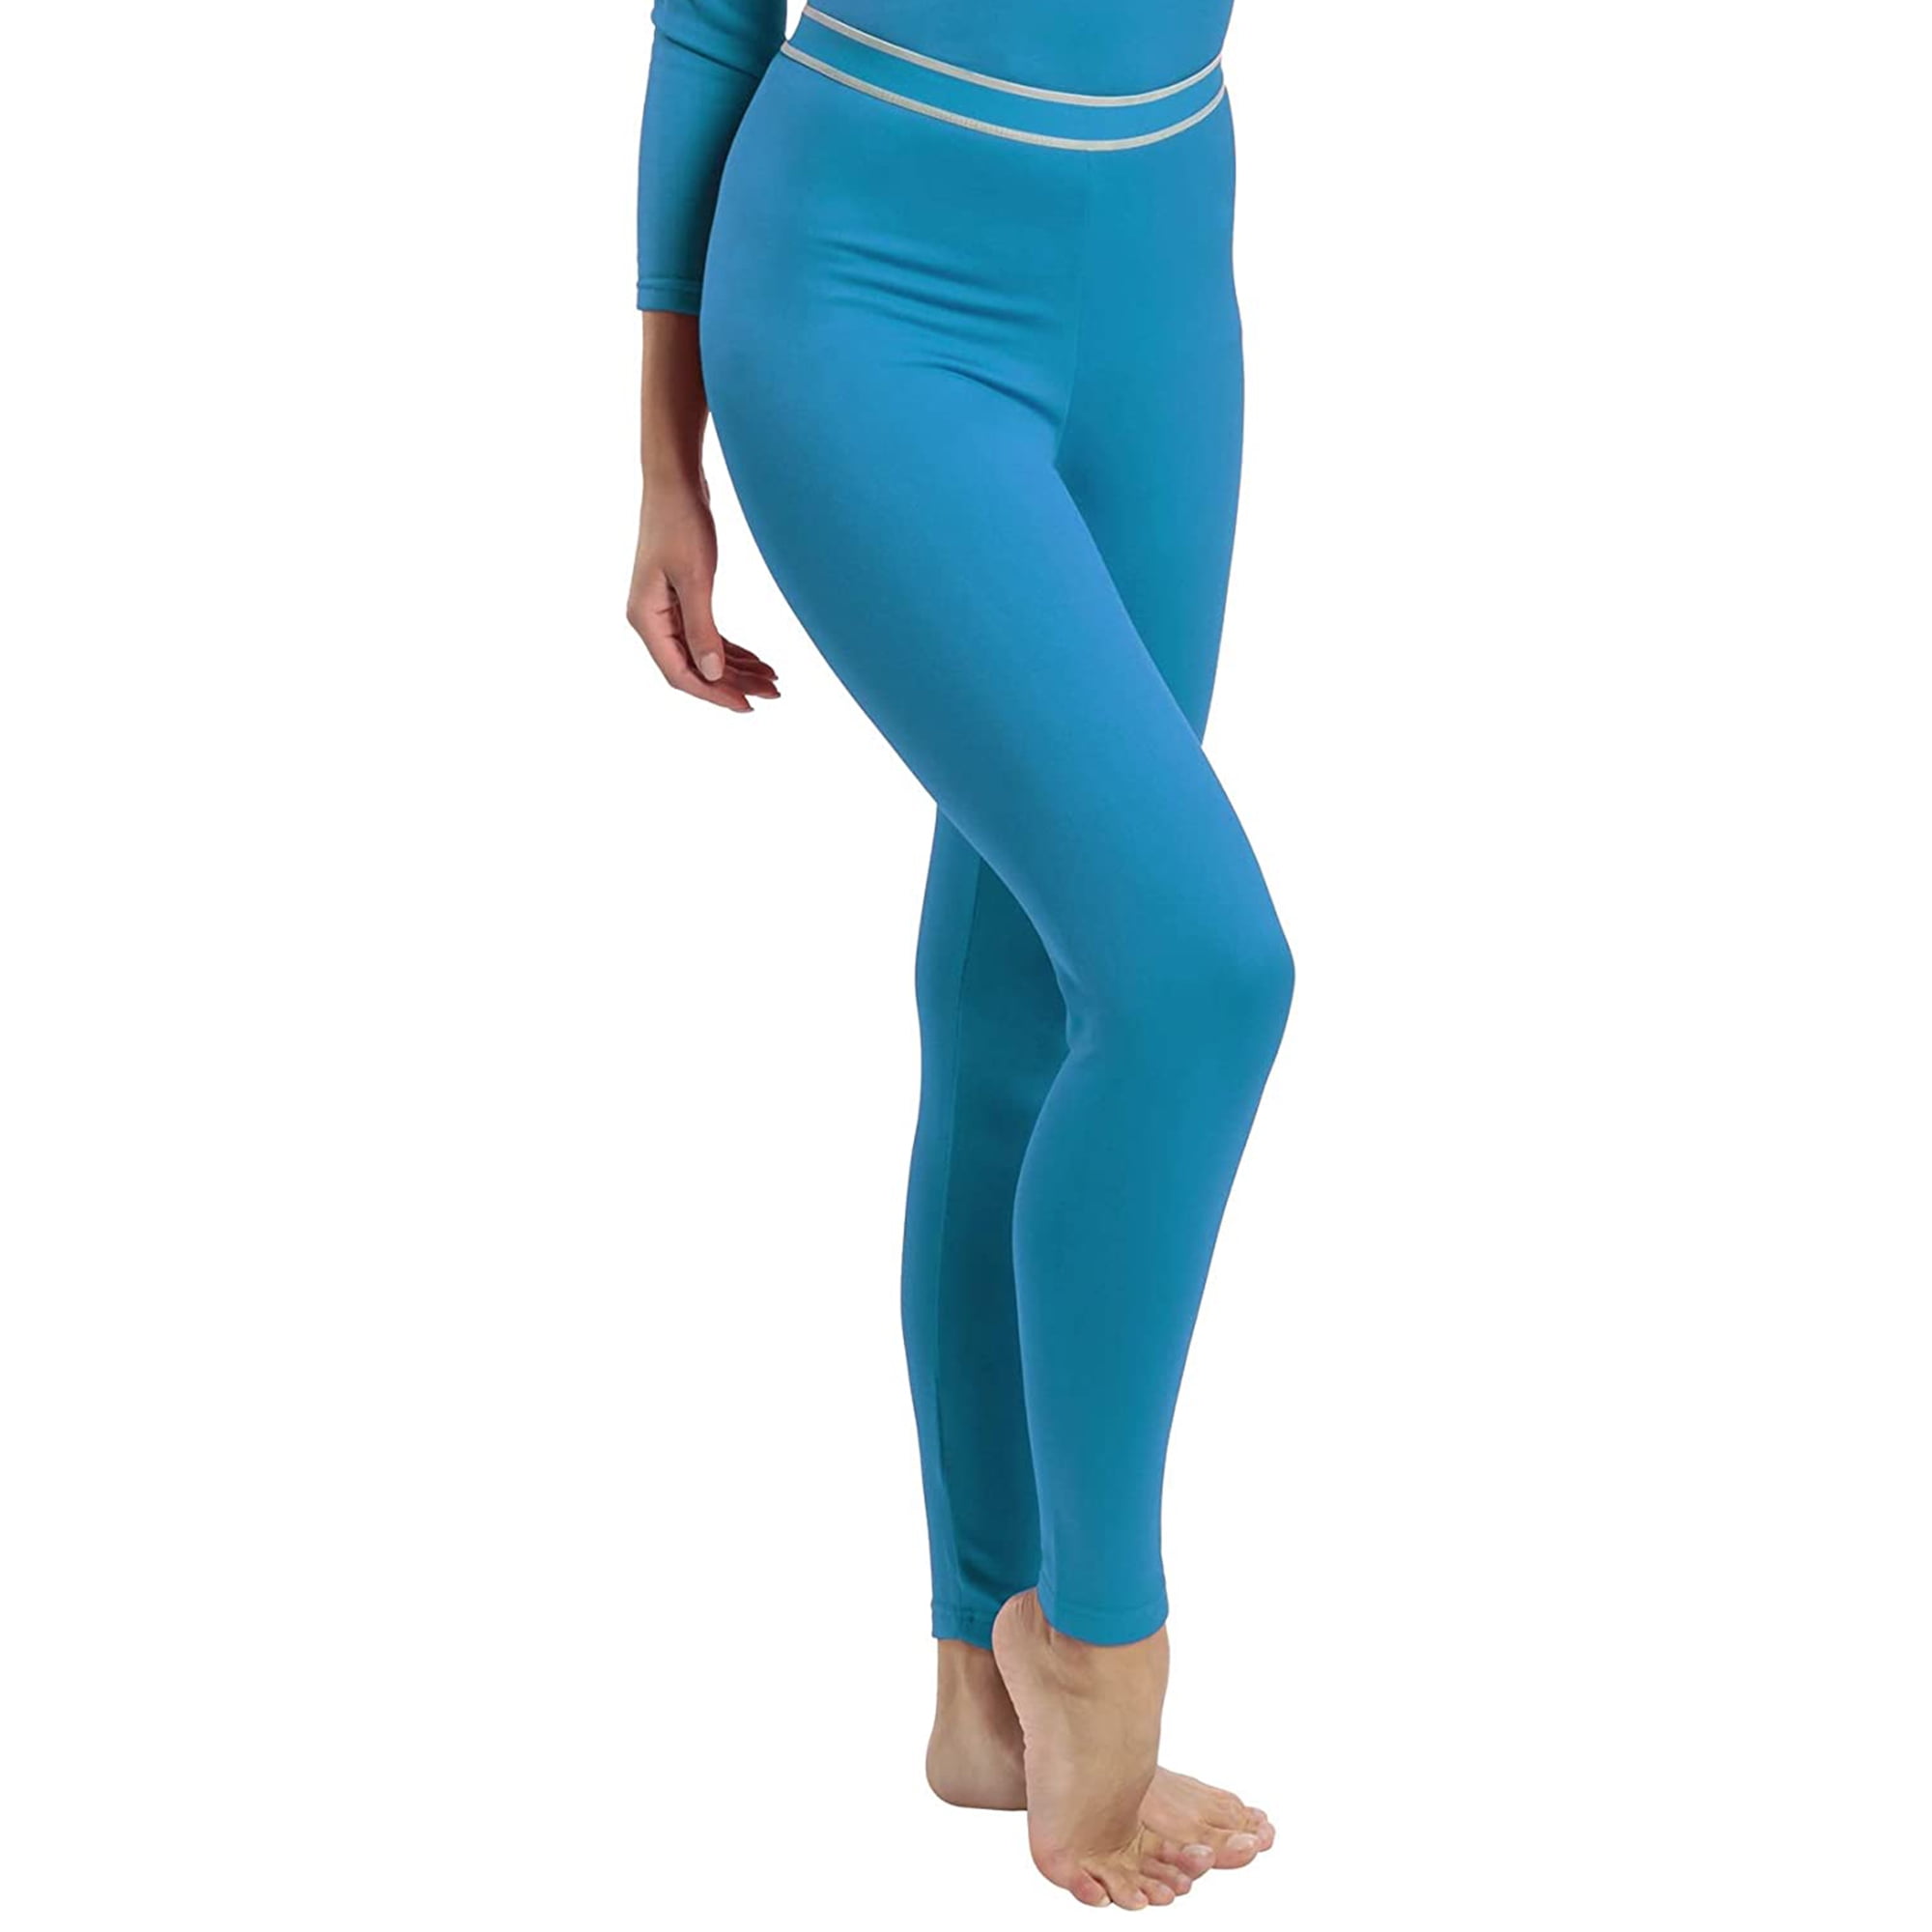 Thermal Underwear Set for Women Soft Cozy Long Johns Winter Warm Base Layer  Top & Bottom for Cold Weather